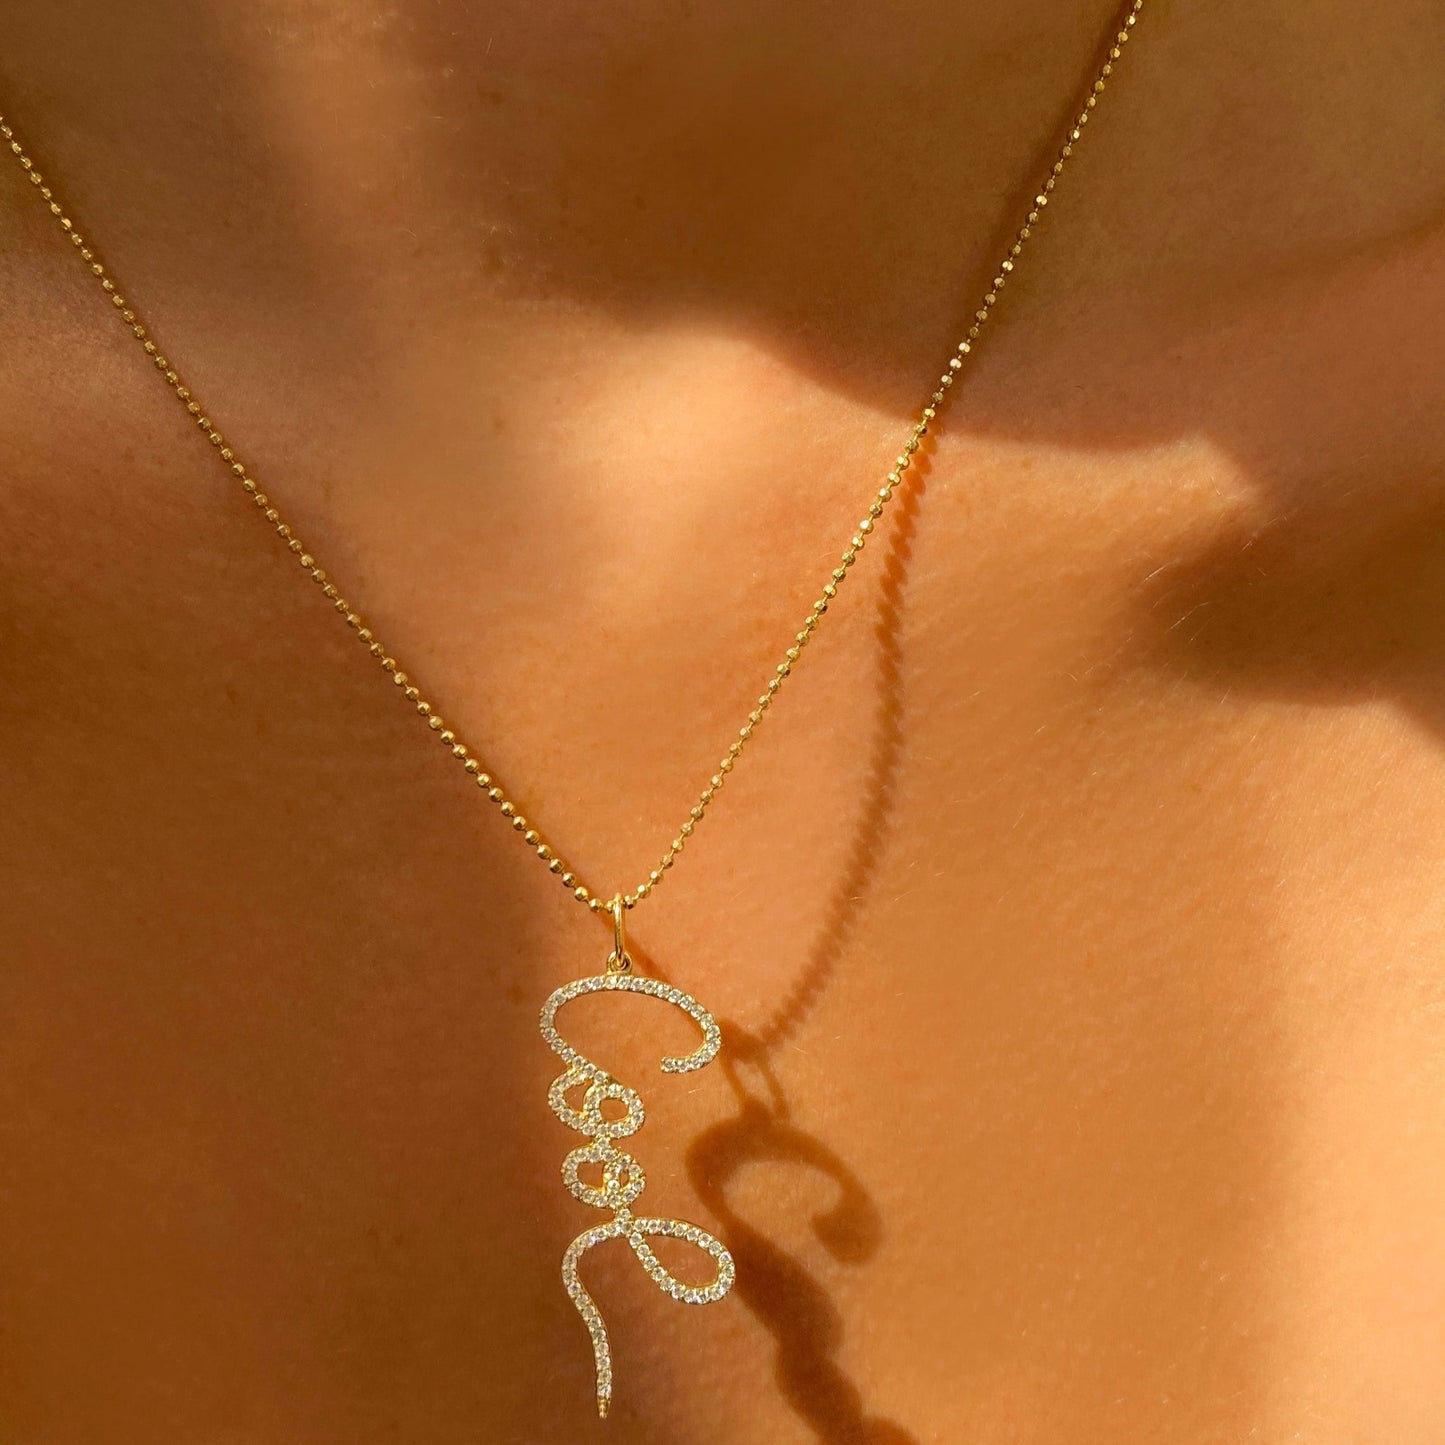 14k gold Diamond Cut Bead Chain Necklace. Styled on a neck with a pave graffiti "Cool" charm